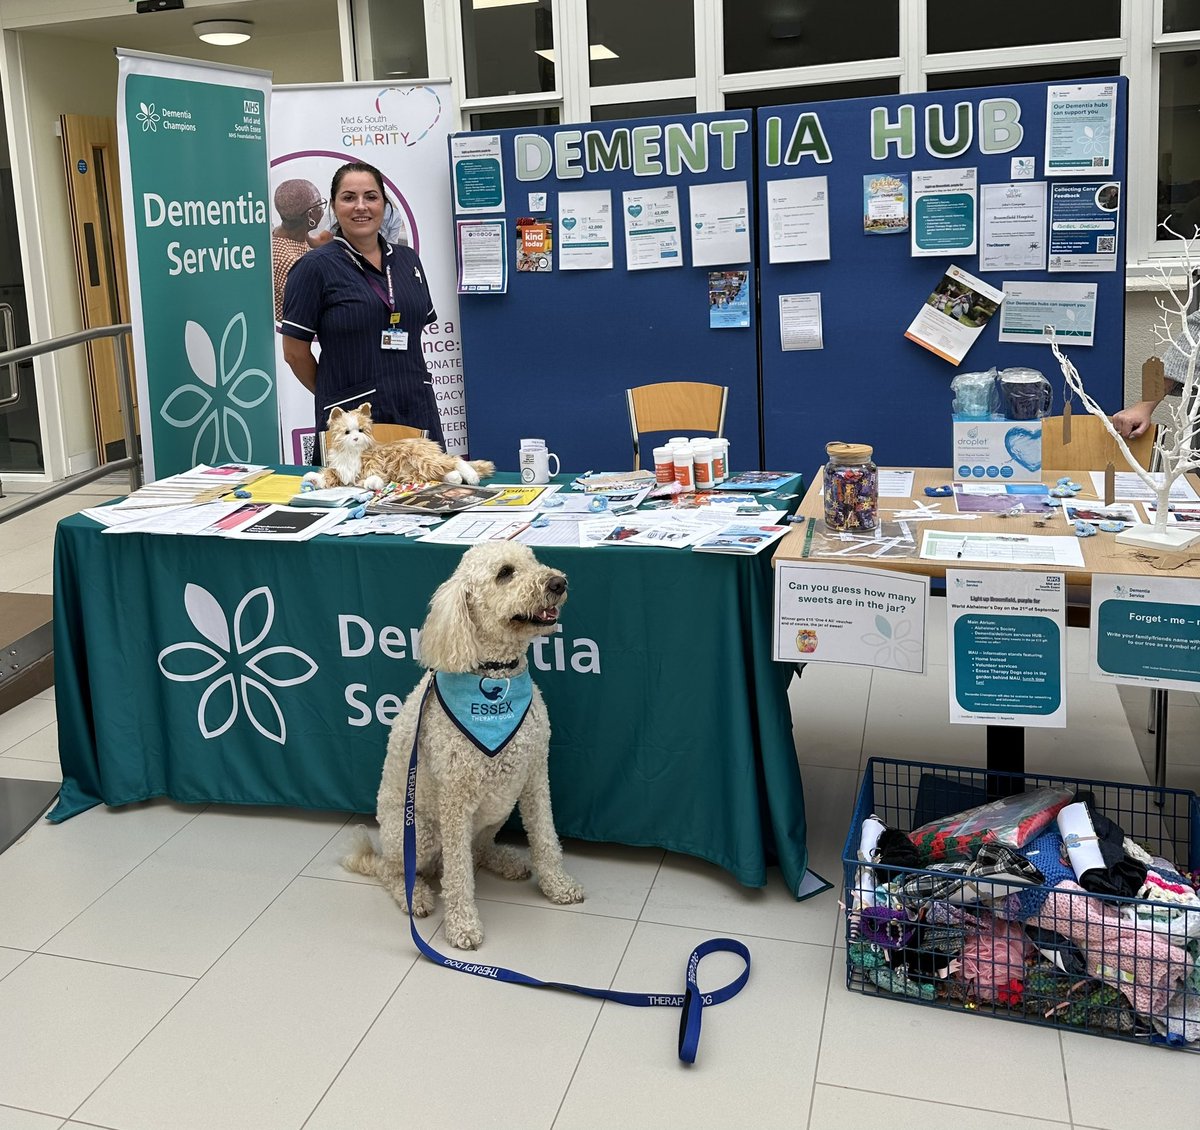 Our services in the hospital and community. #Broomfieldhospital Atrium and MAU.   @worldalzheimersday @hannahoverland @Mel_Chambers76 @MSEHospitals @essextherapydog @MSEVolunteers @MSEPatientExp @kellyMcgovern21 @alzheimerssoc @homeinstead #MSETeams #MSEValues #johnscampaign